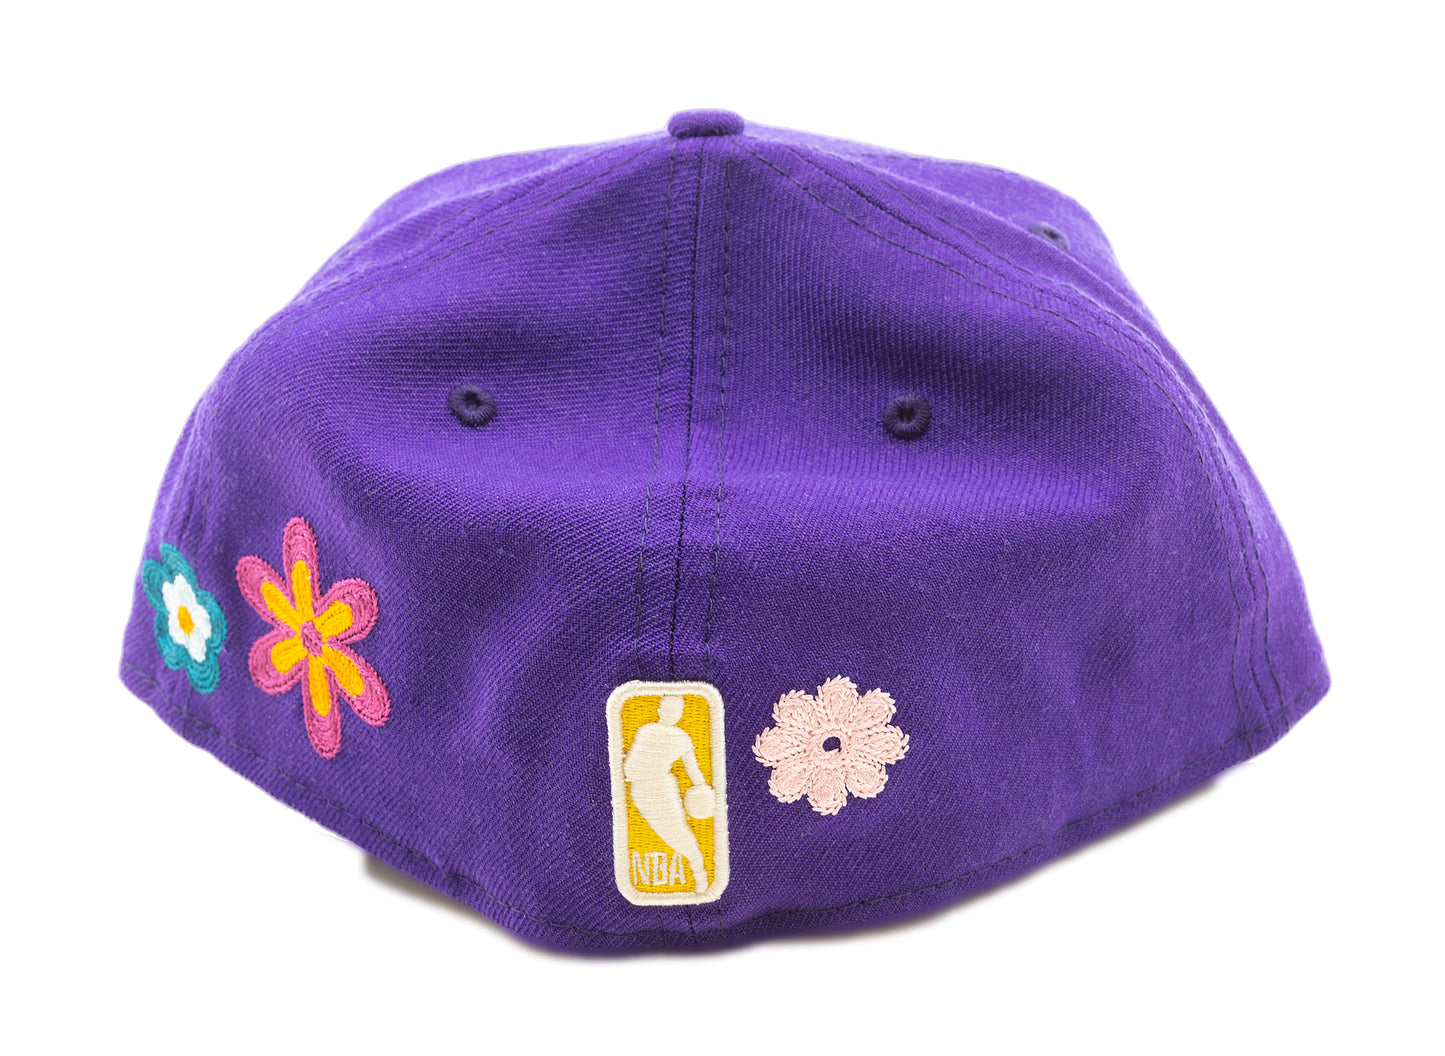 New Era Lakers Floral Fitted Hat